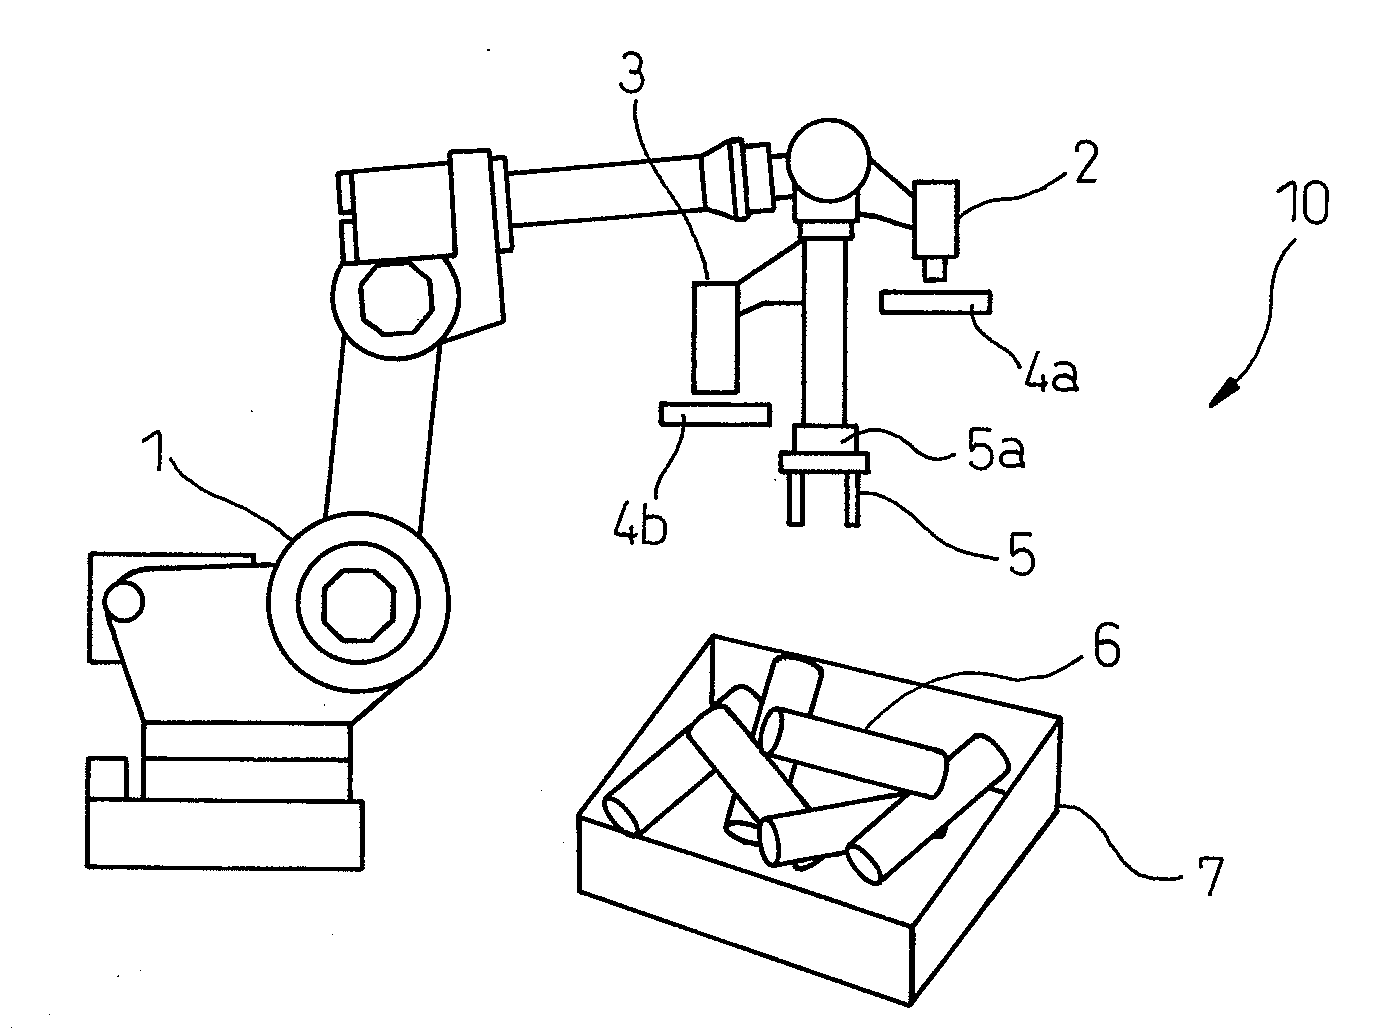 Apparatus for picking up objects